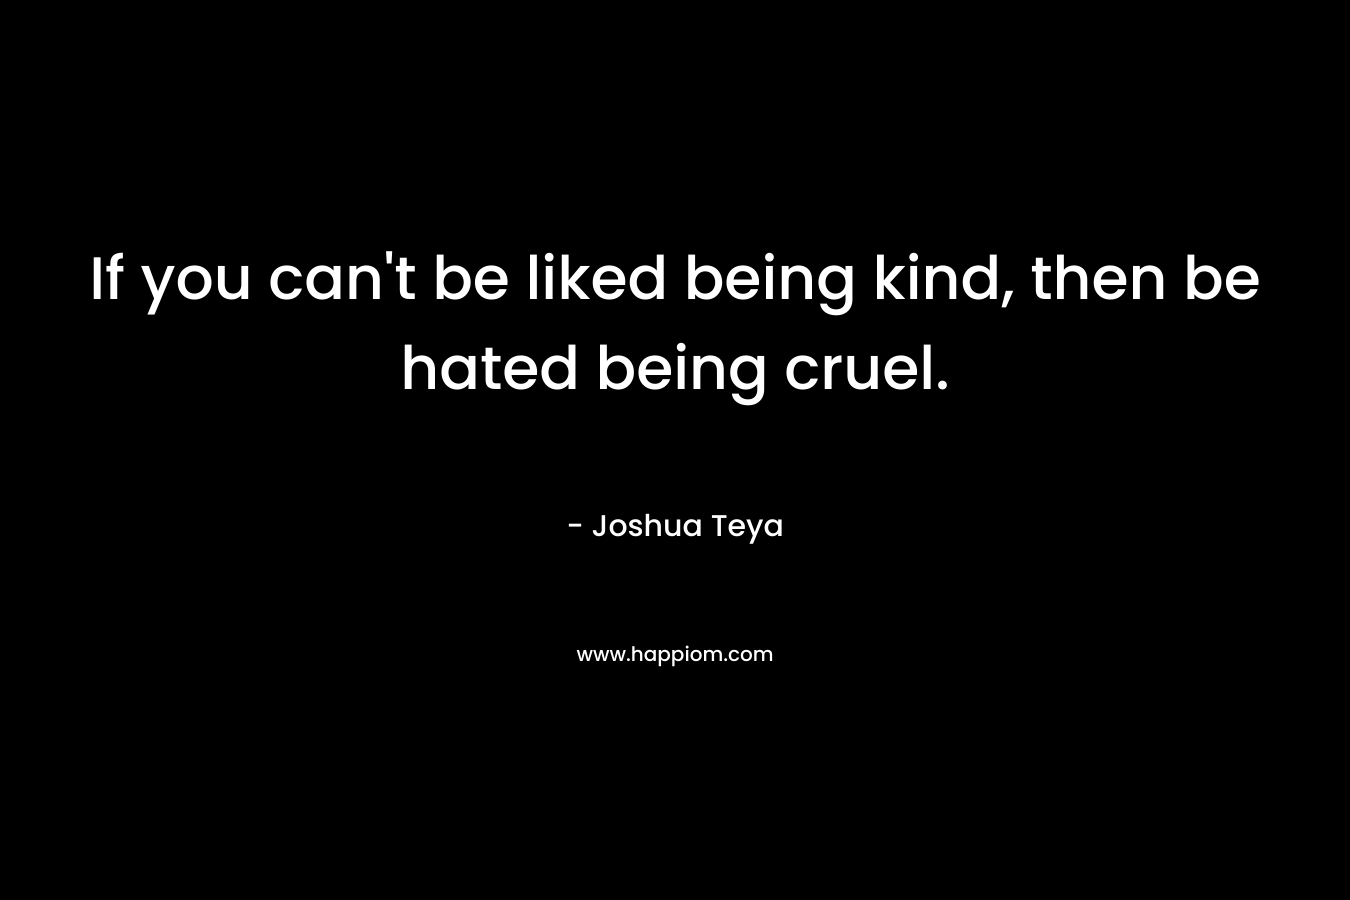 If you can't be liked being kind, then be hated being cruel.